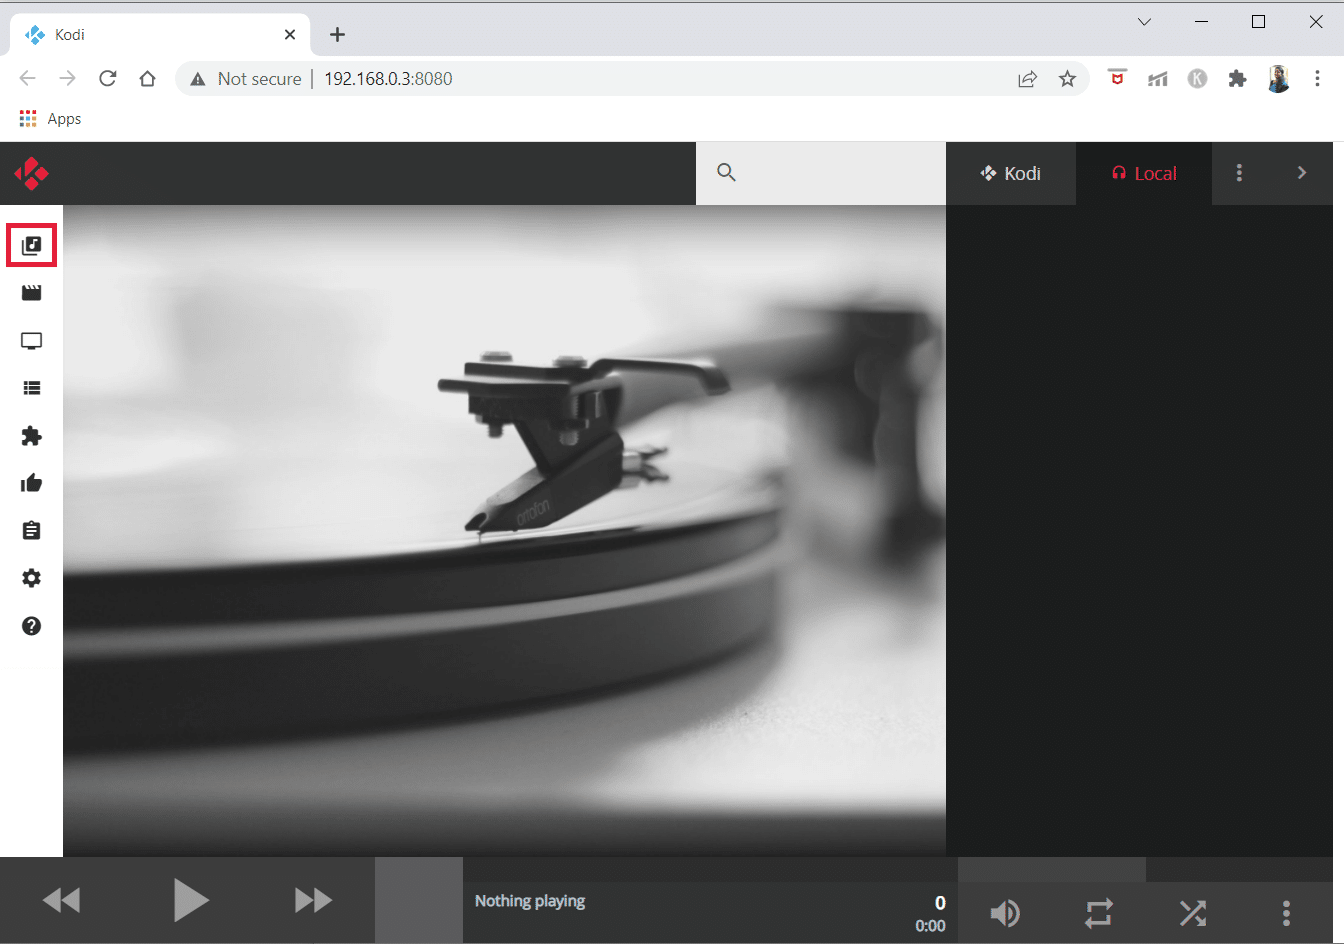 Click on the Music icon in the right pane